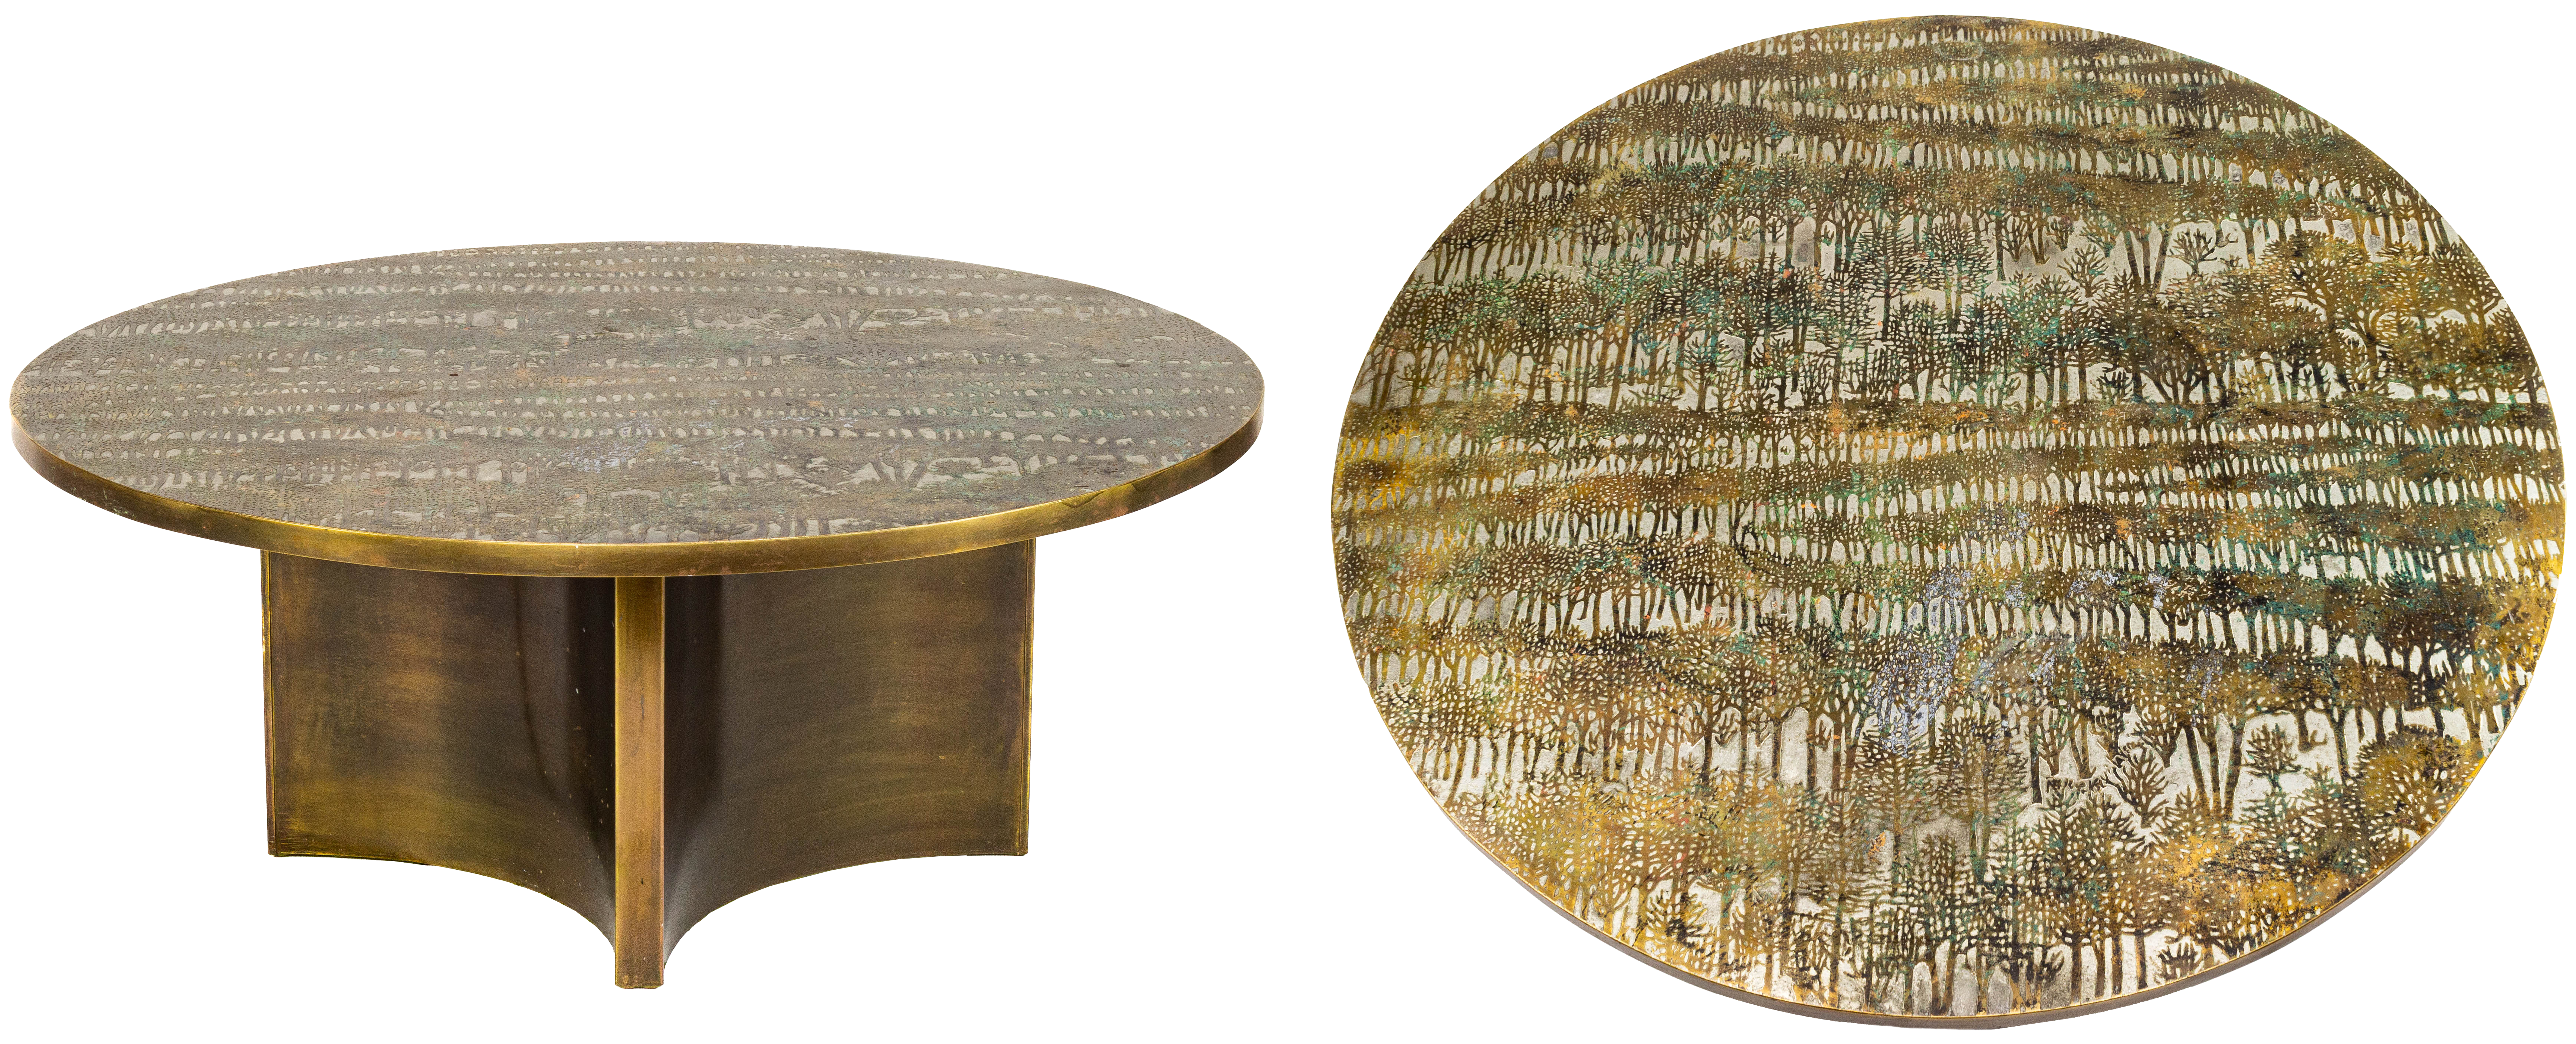 Philip and Kevin LaVerne, Eternal Forest coffee table, USA, circa 1969, acid-etched and enameled patinated brass over pewter over wood. Right: top view.